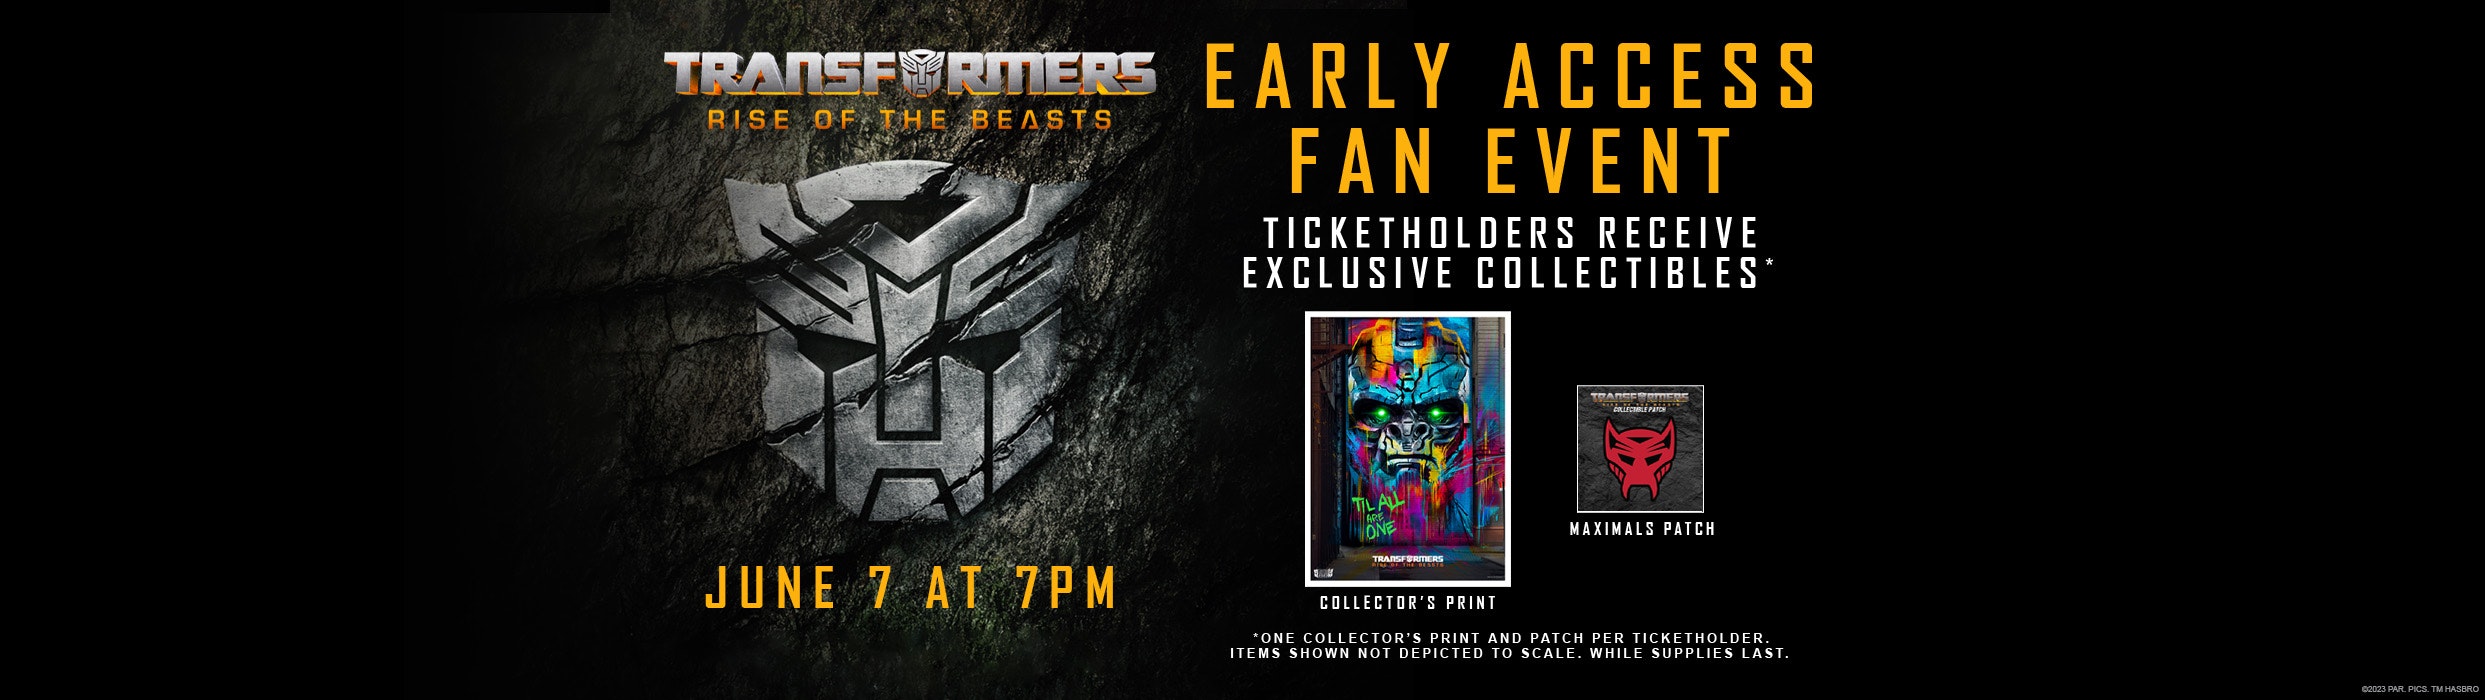 See Transformers: Rise of the Beasts Early Access Screening on The Valley’s Only Full-Size IMAX®! Tickets are on sale now!